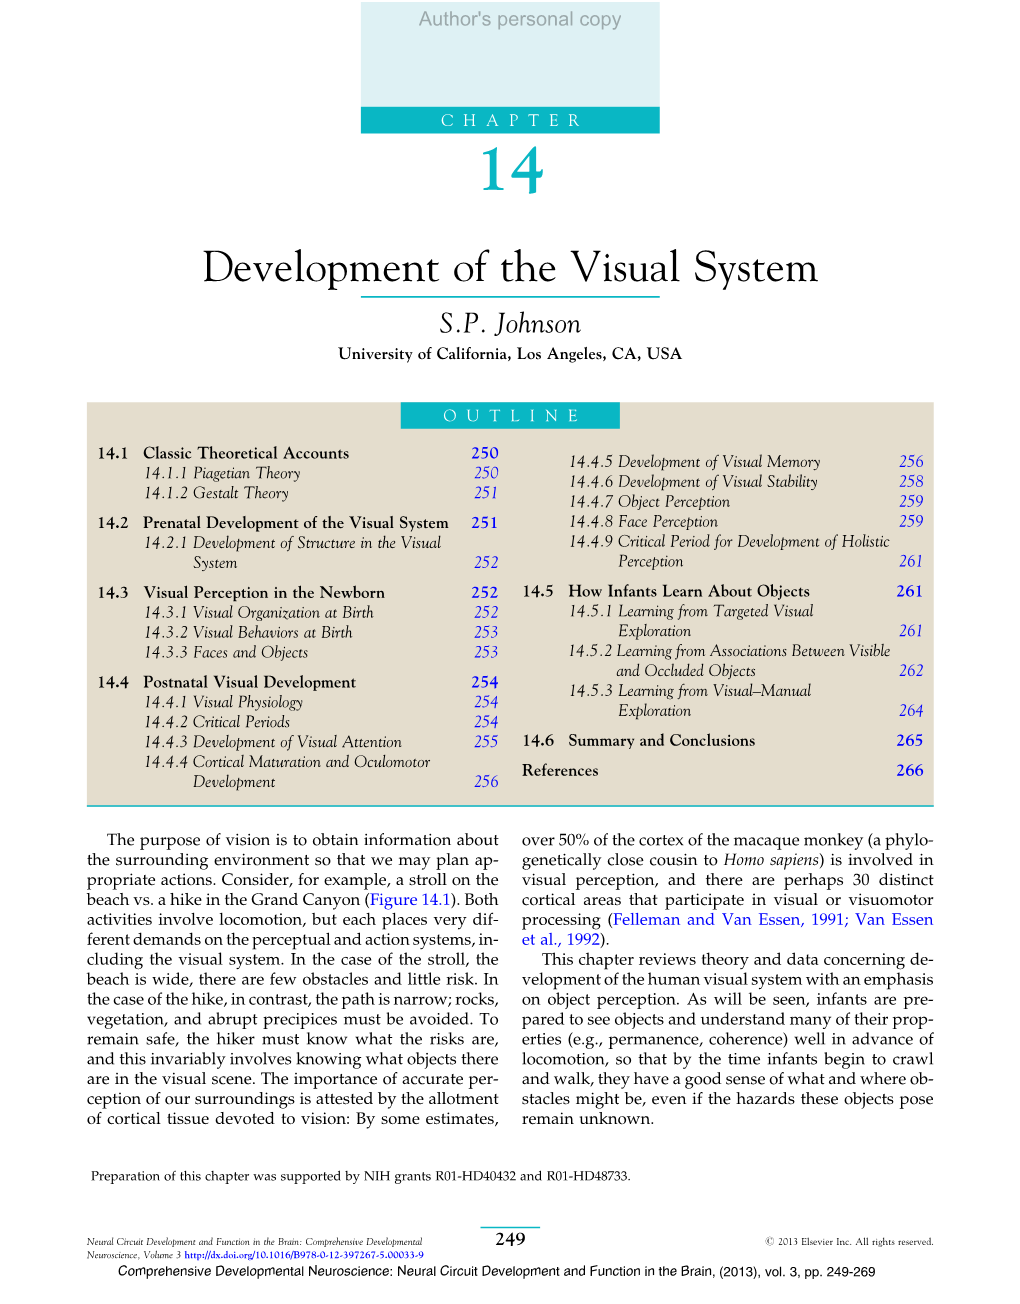 Development of the Visual System